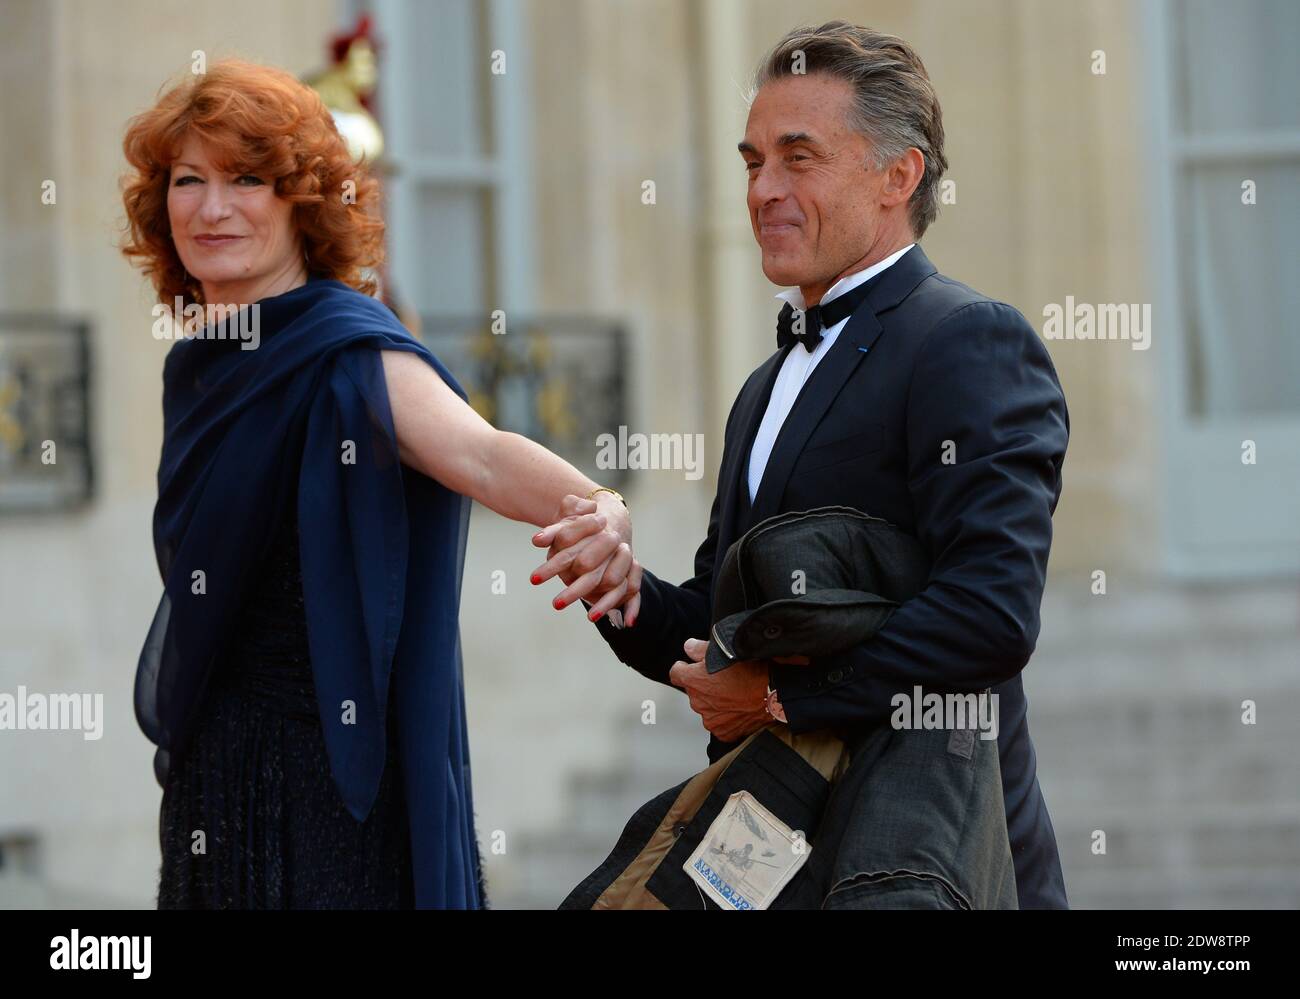 Gerard Holtz and Muriel Mayette attend the State Banquet given in honour of HM The Queen Elizabeth II by French President Francois Hollande at the Elysee Palace, as part of the official ceremonies of the 70th Anniversary of the D Day, on June 6, 2014, in Paris, France. Photo by Christian Liewig/ABACAPRESS.COM Stock Photo